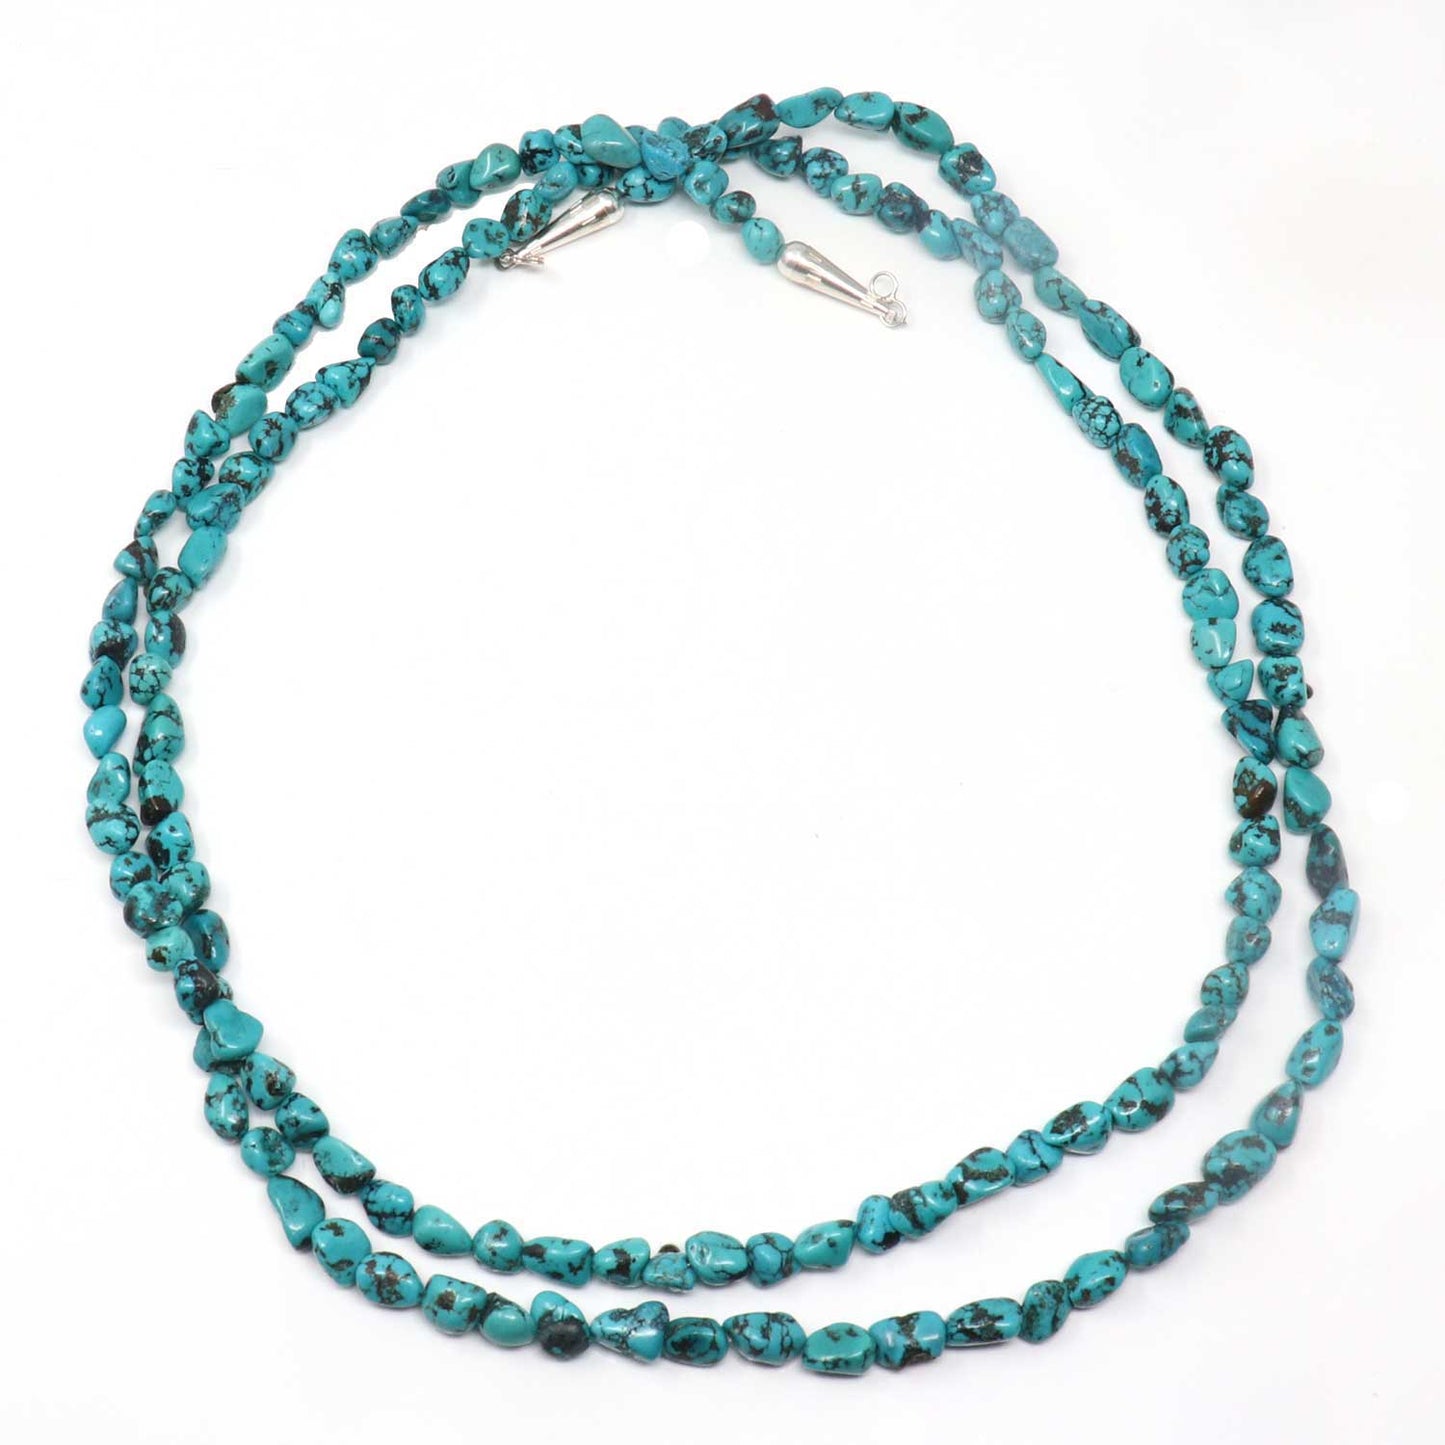 49" Blue Turquoise Necklace by Cate